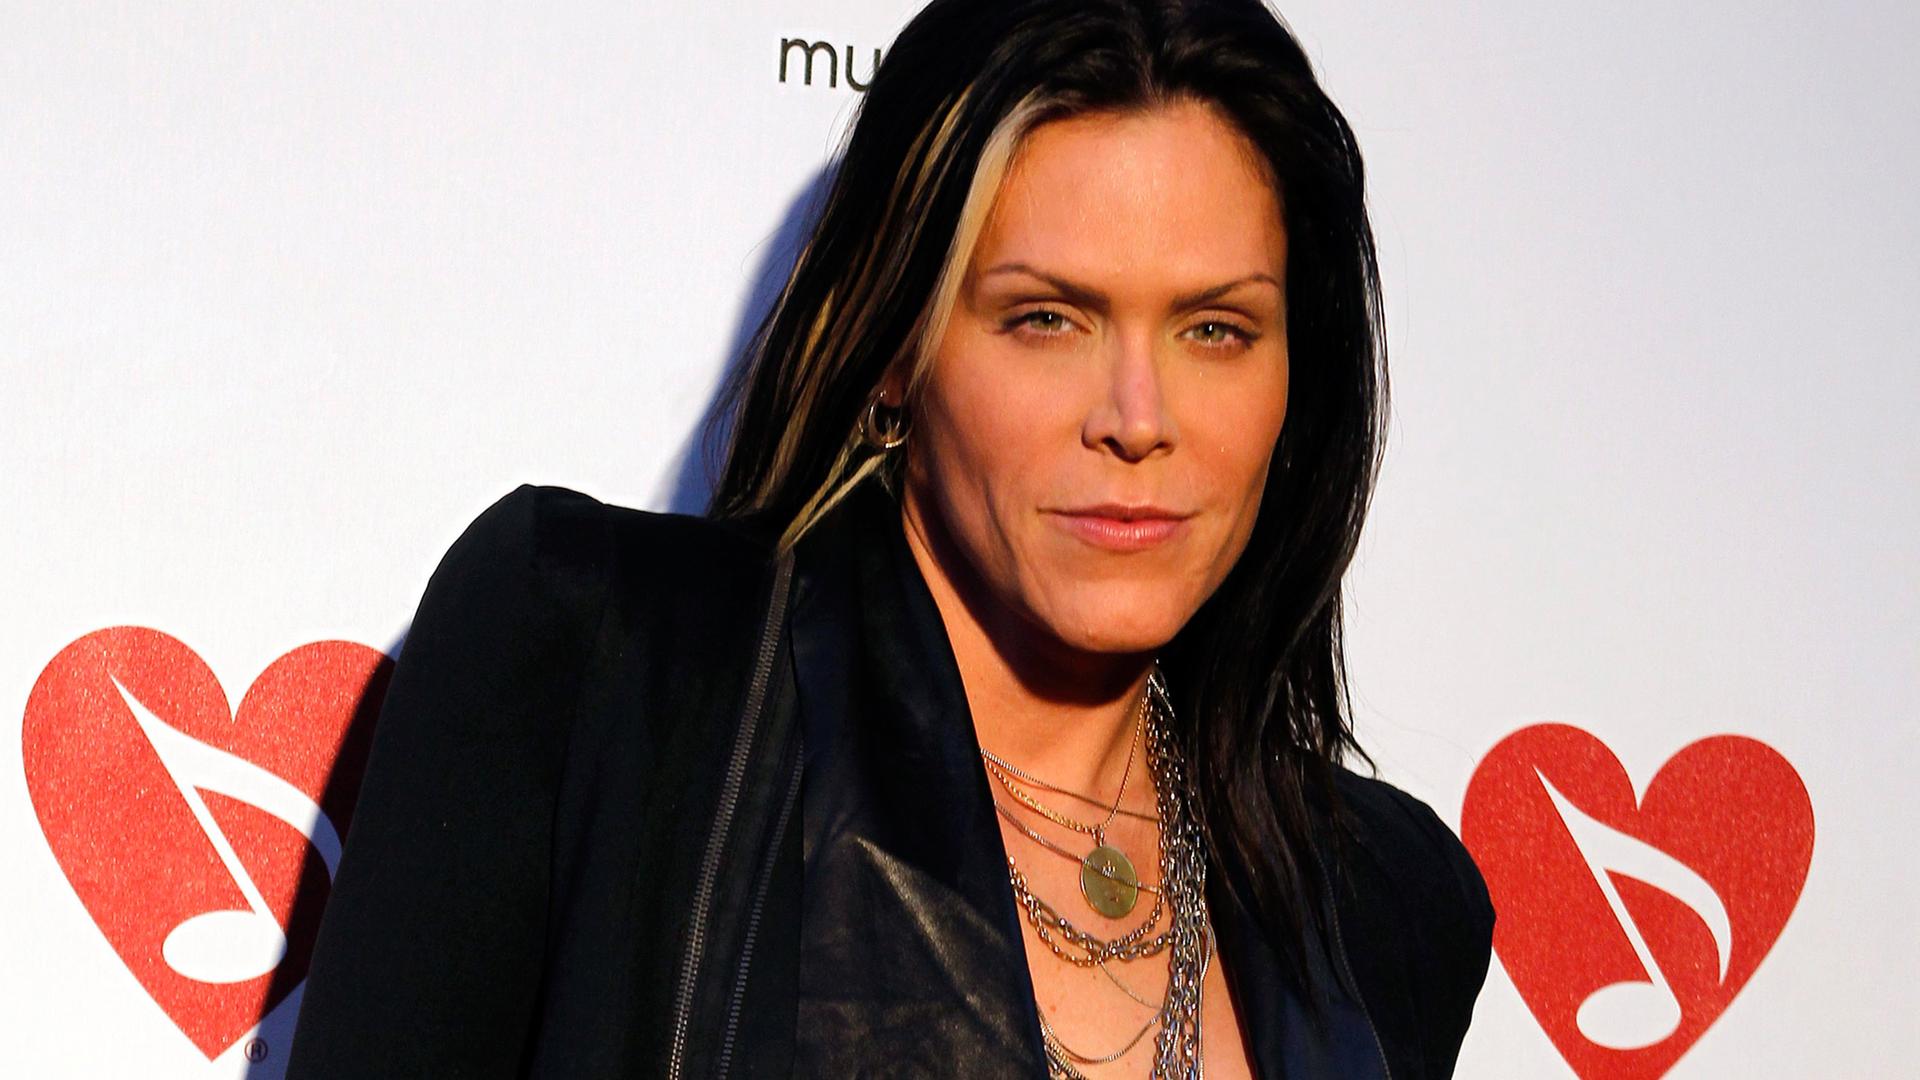 US singer Beth Hart, recorded at the 6th MusiCares MAP Fund benefit concert in Los Angeles in 2010.